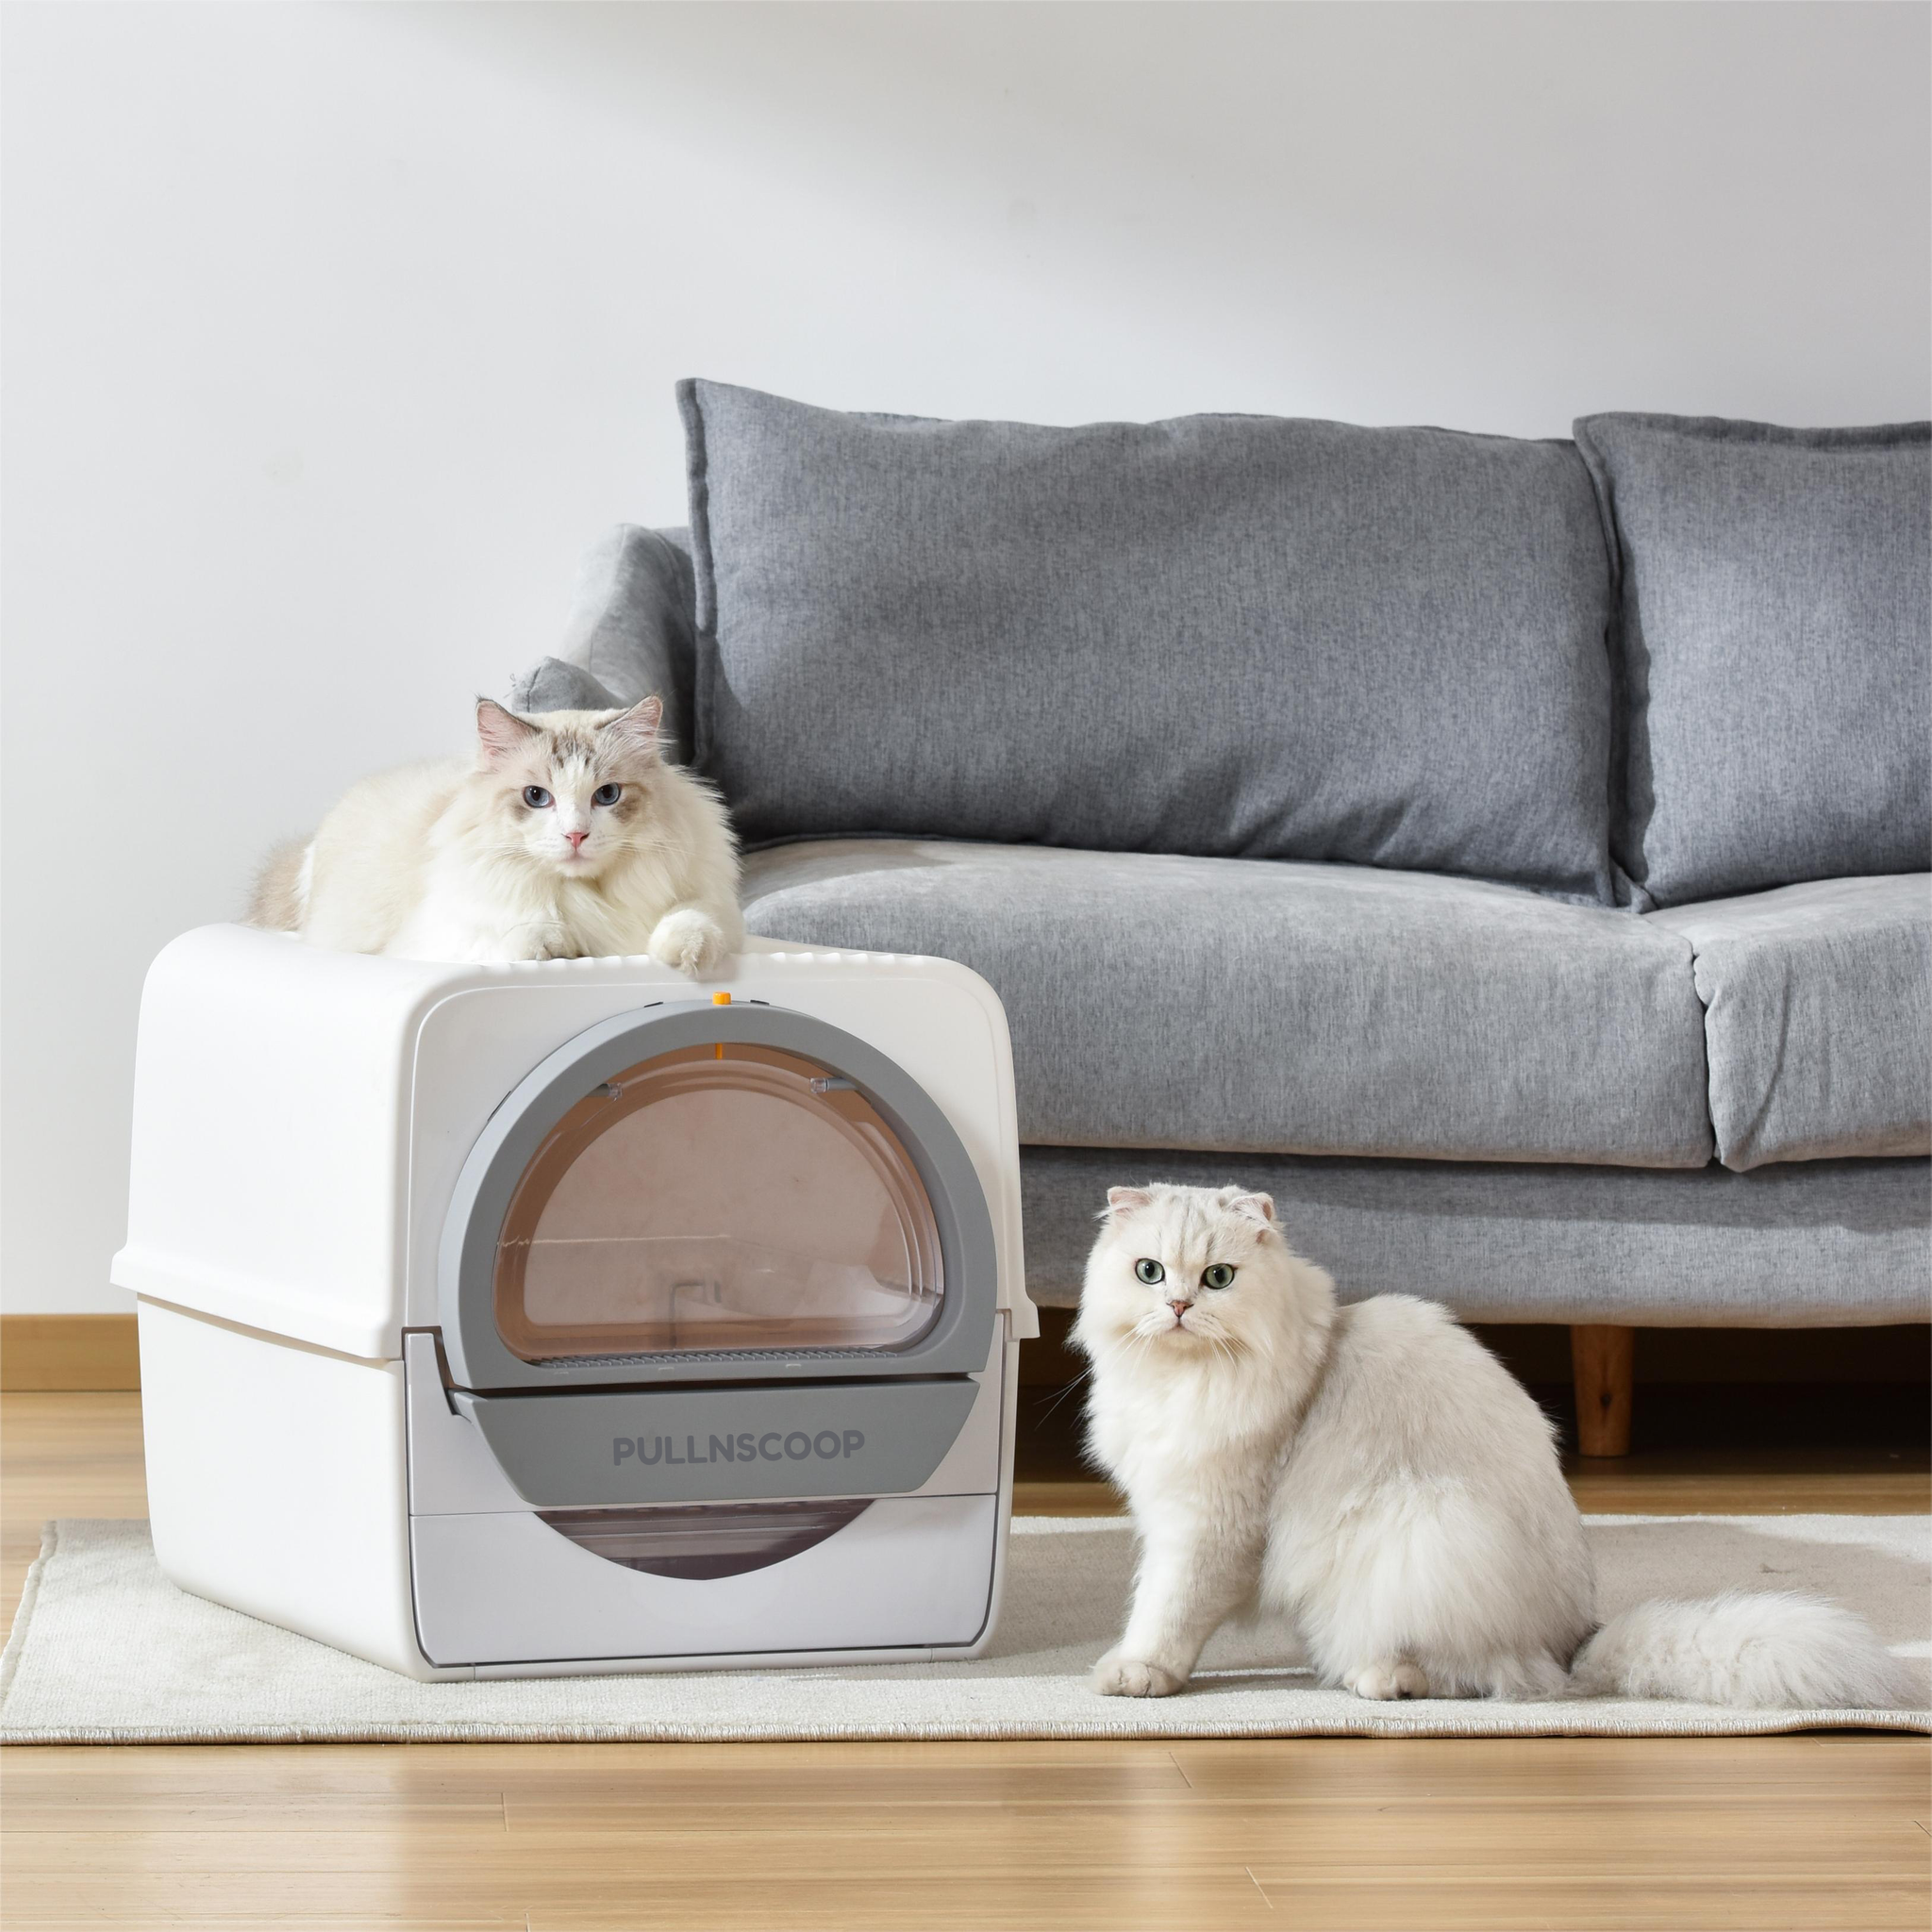 Handicap Accessible Litter Box For Cats, Litter Box For Senior Cats Too! 